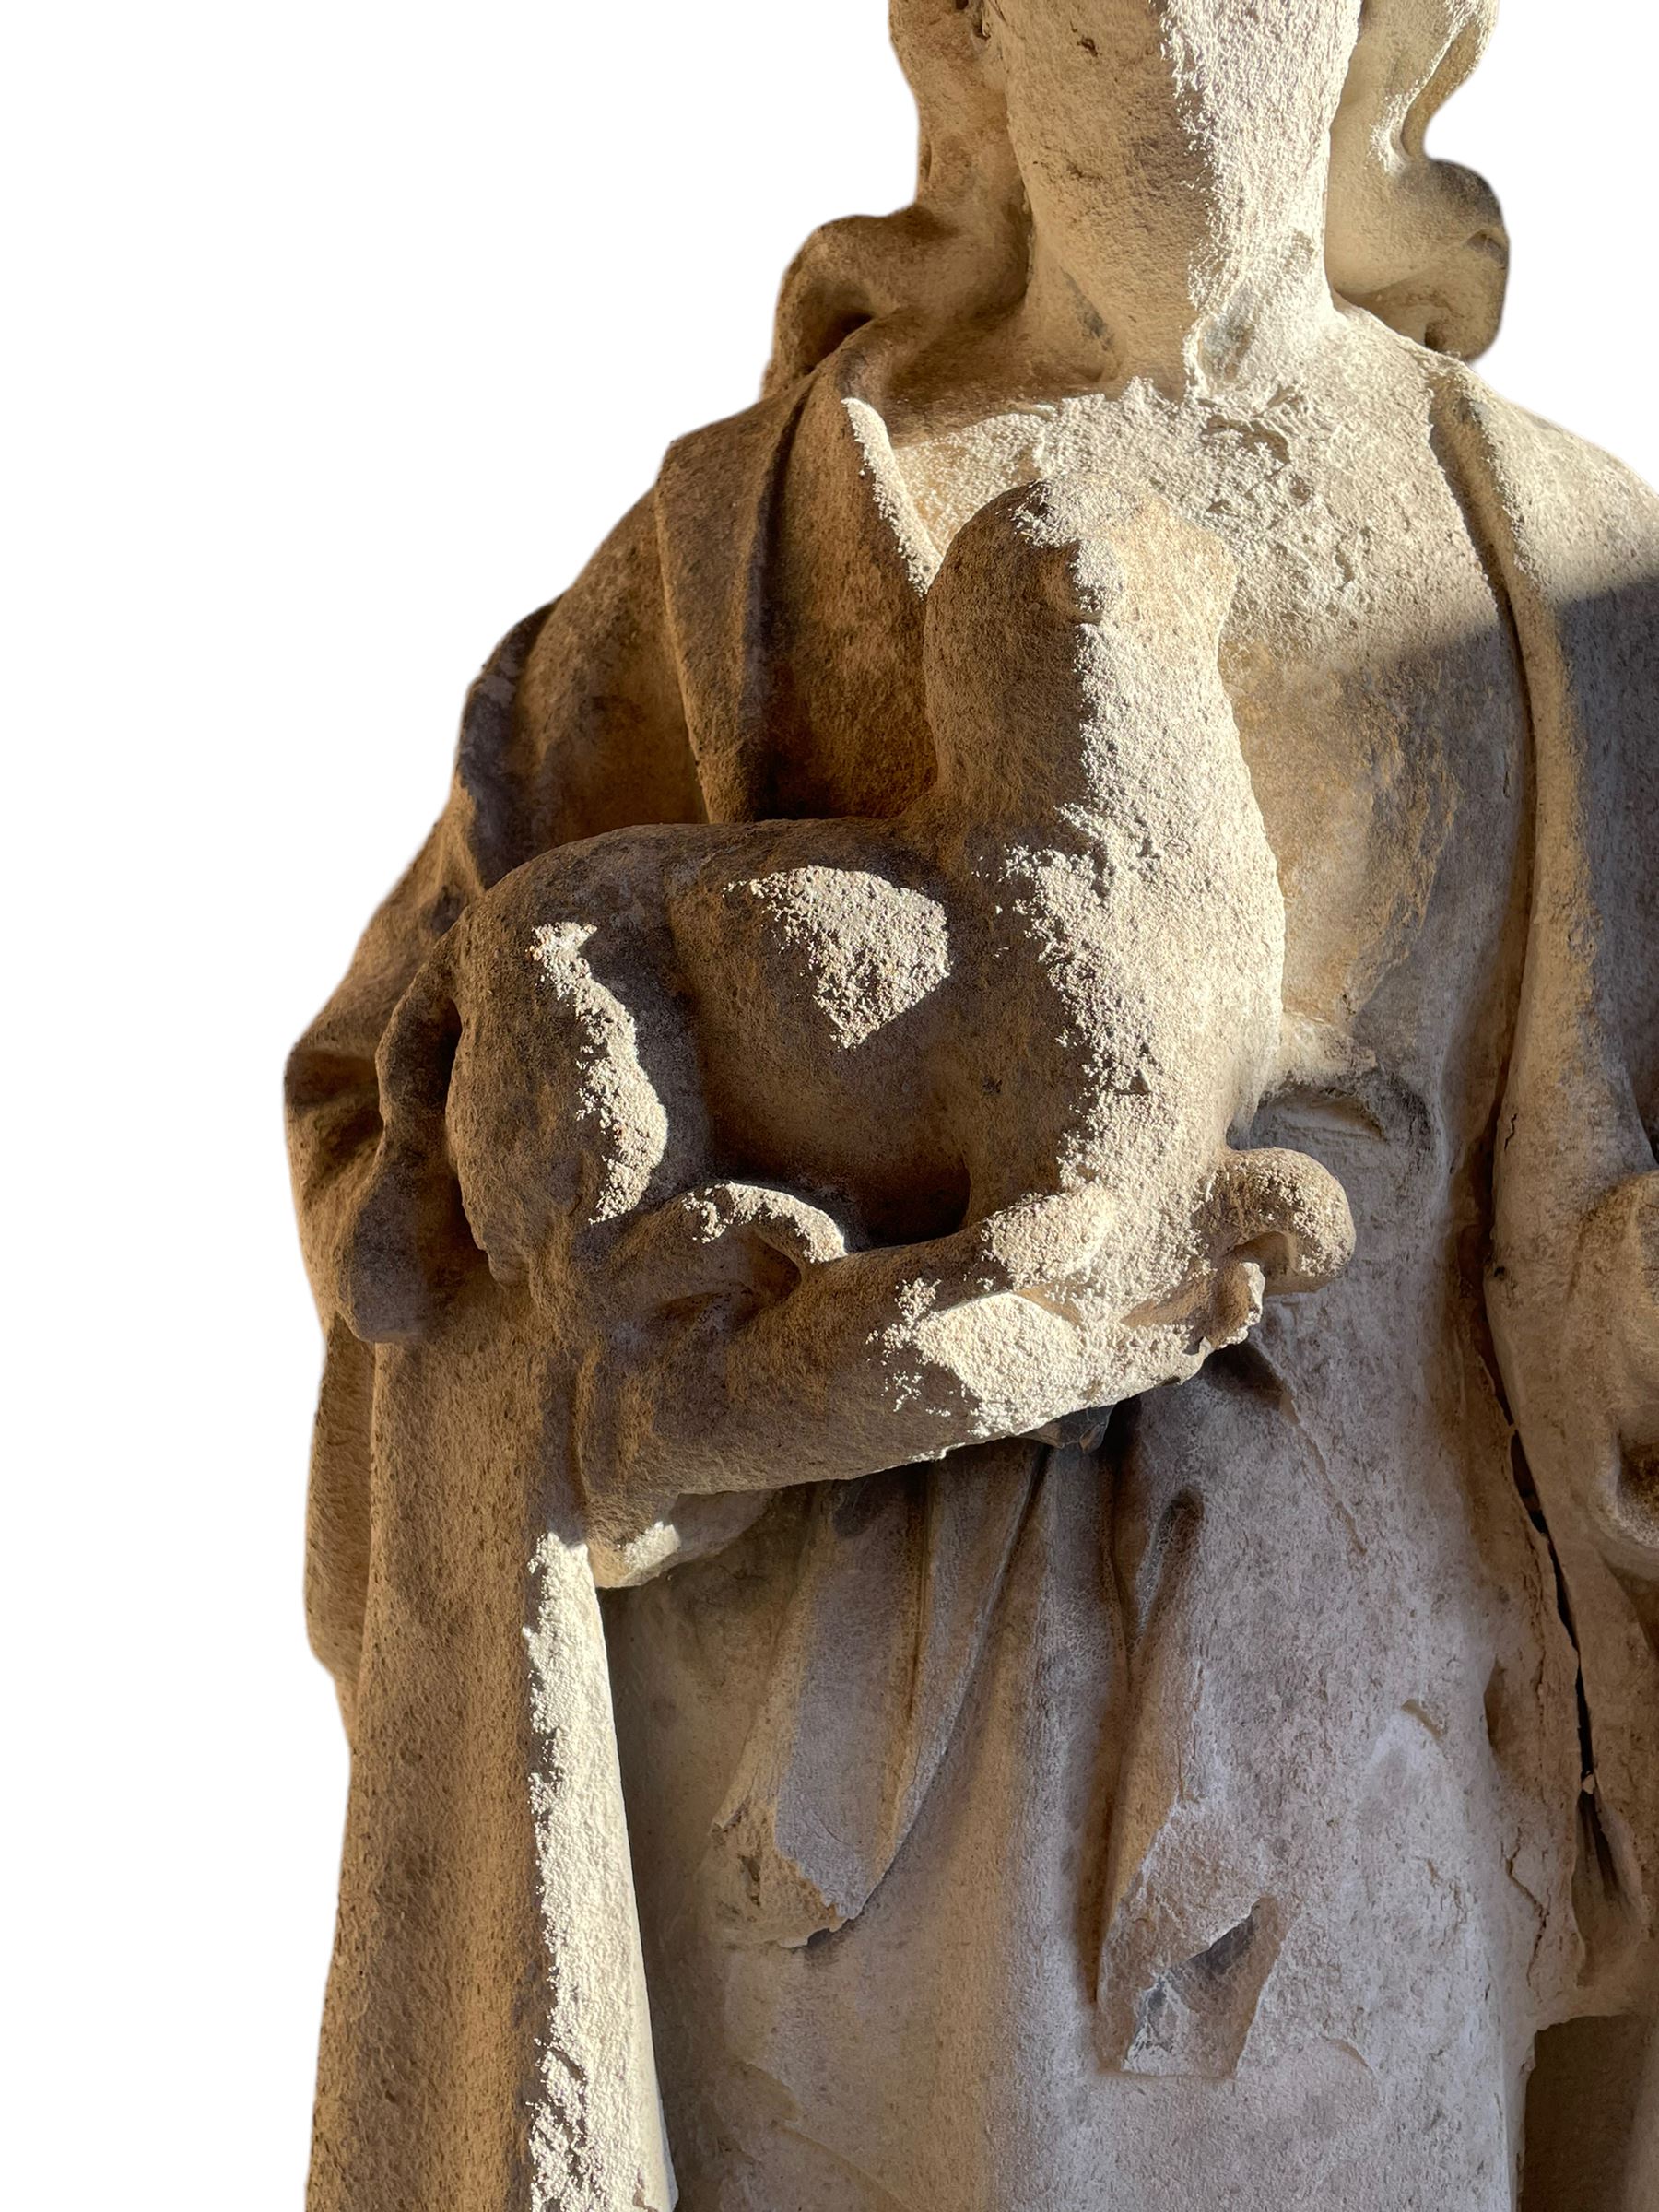 19th century weathered carved sandstone figure of Jesus Christ depicted as the Good Shepherd - Image 7 of 7